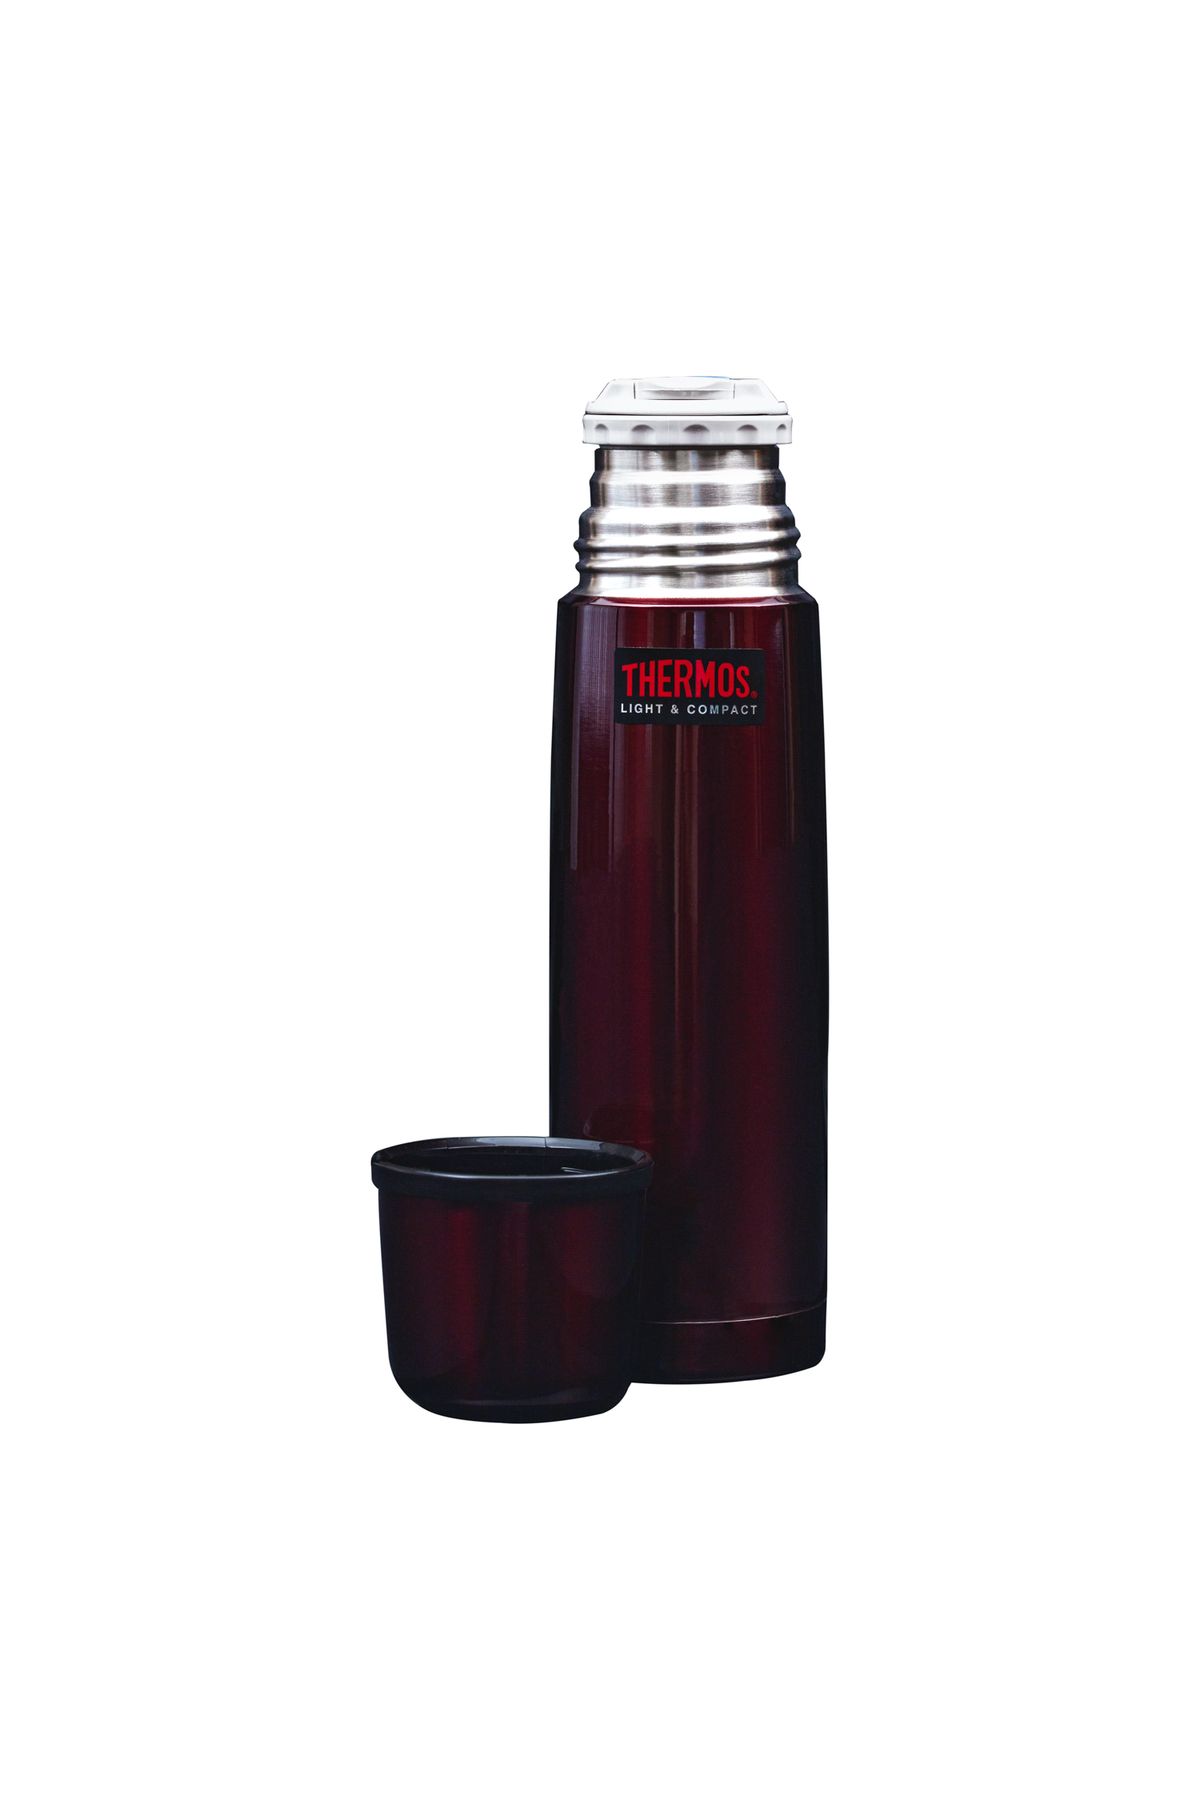 Thermos Fbb-750 Light Compact 0.75l Midnight Red 186879